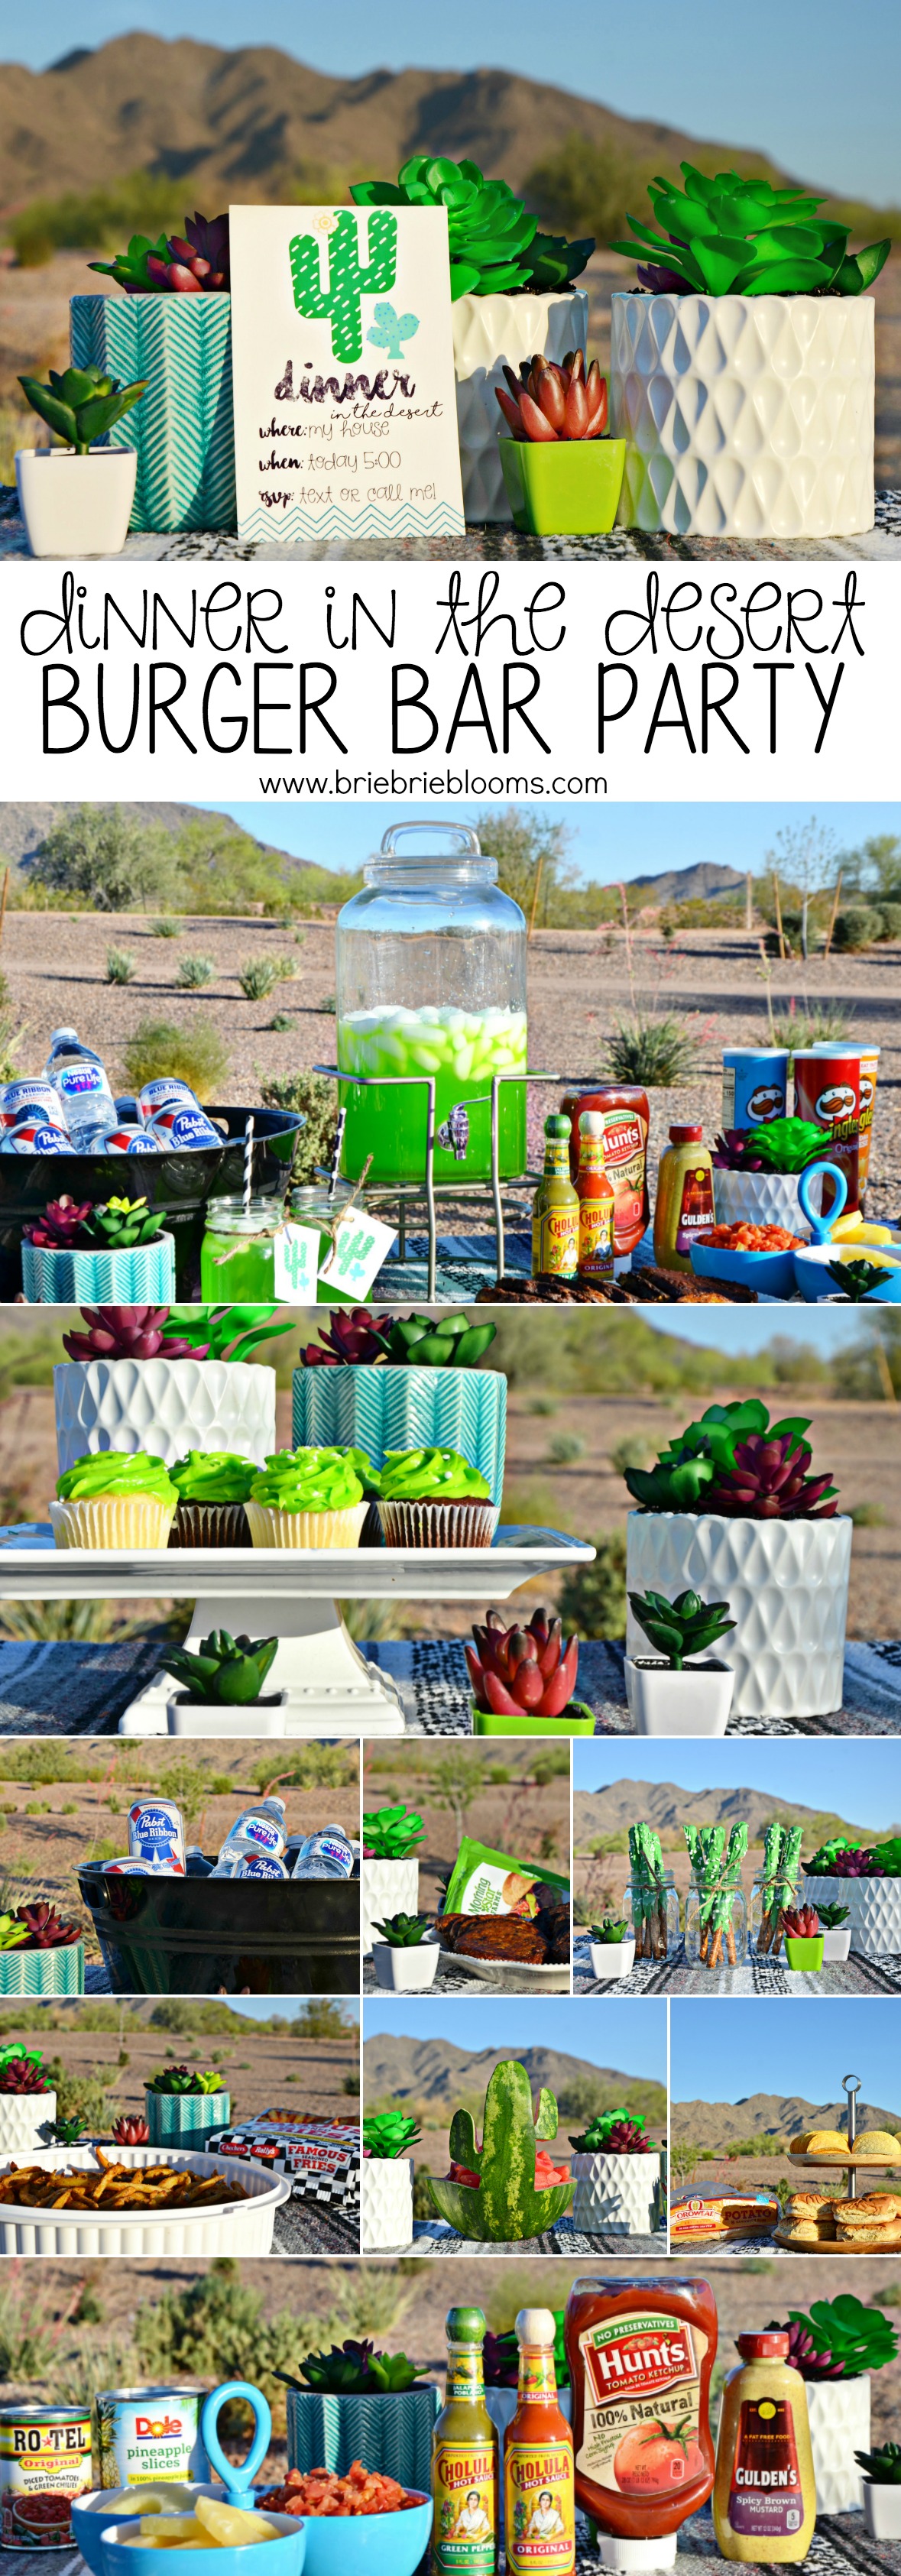 Host a dinner in the desert burger bar party with this shopping list and easy recipes.